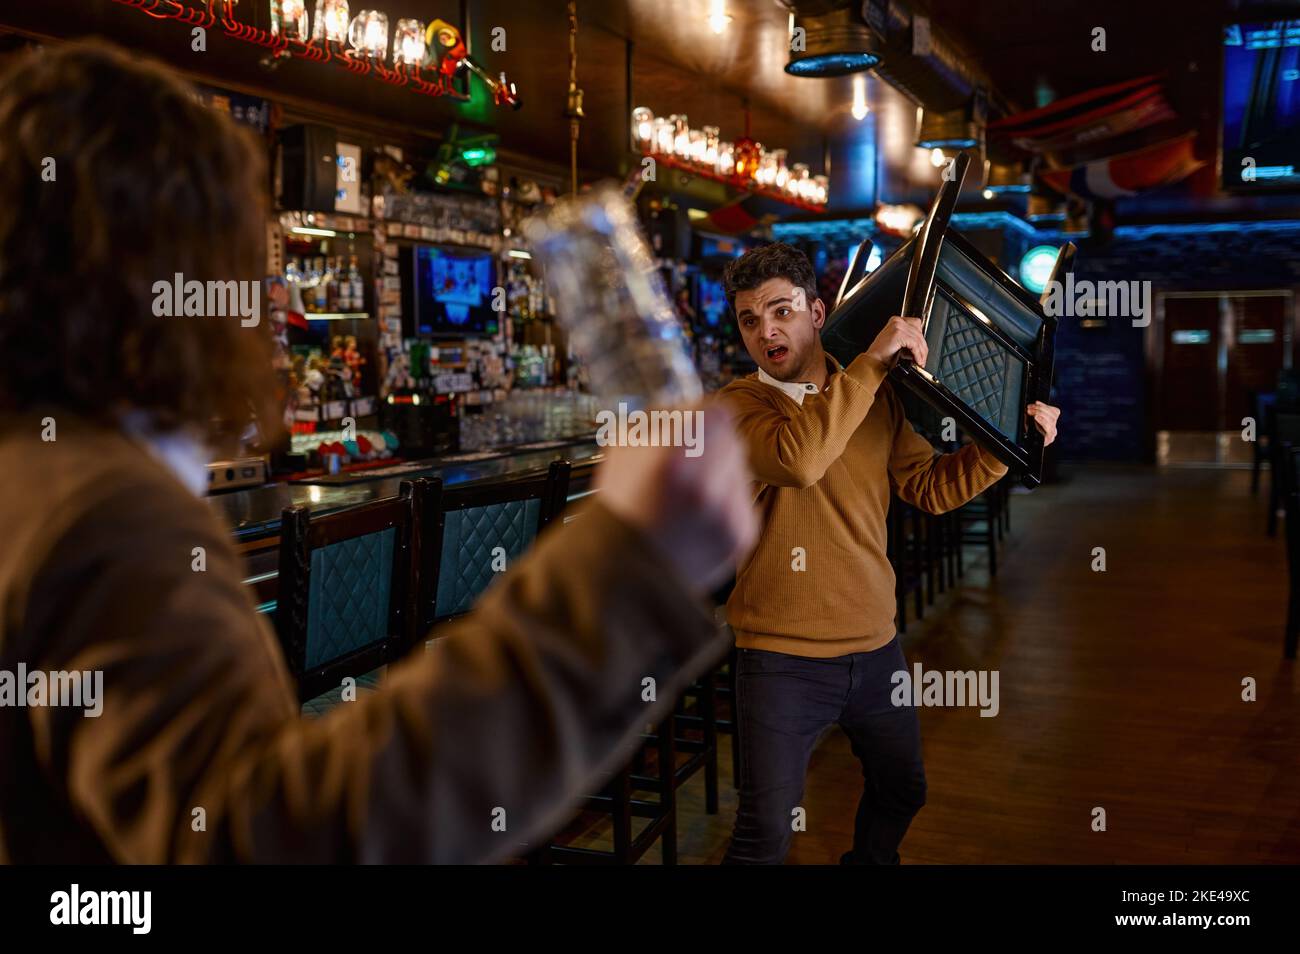 Two man hooligan football fans get in bar fight Stock Photo